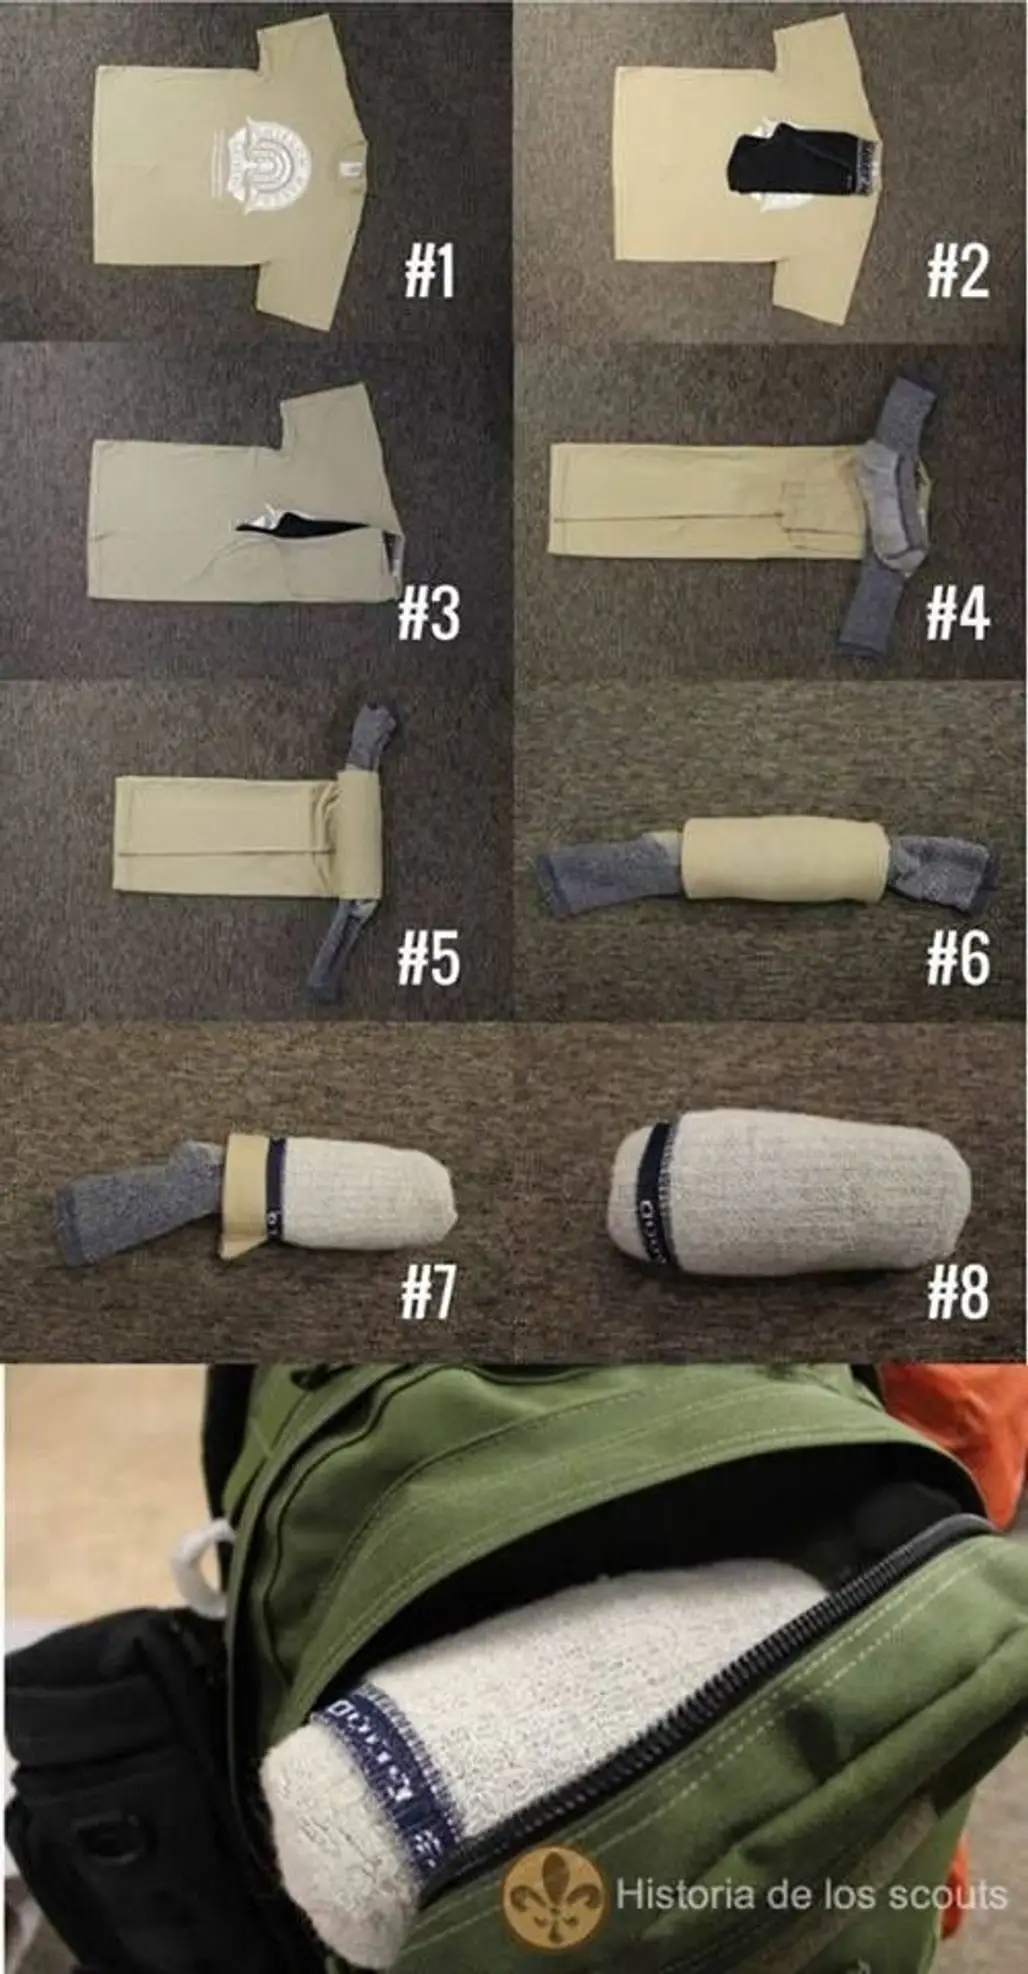 Turn a T-shirt, Underwear and Socks in One Little Roll